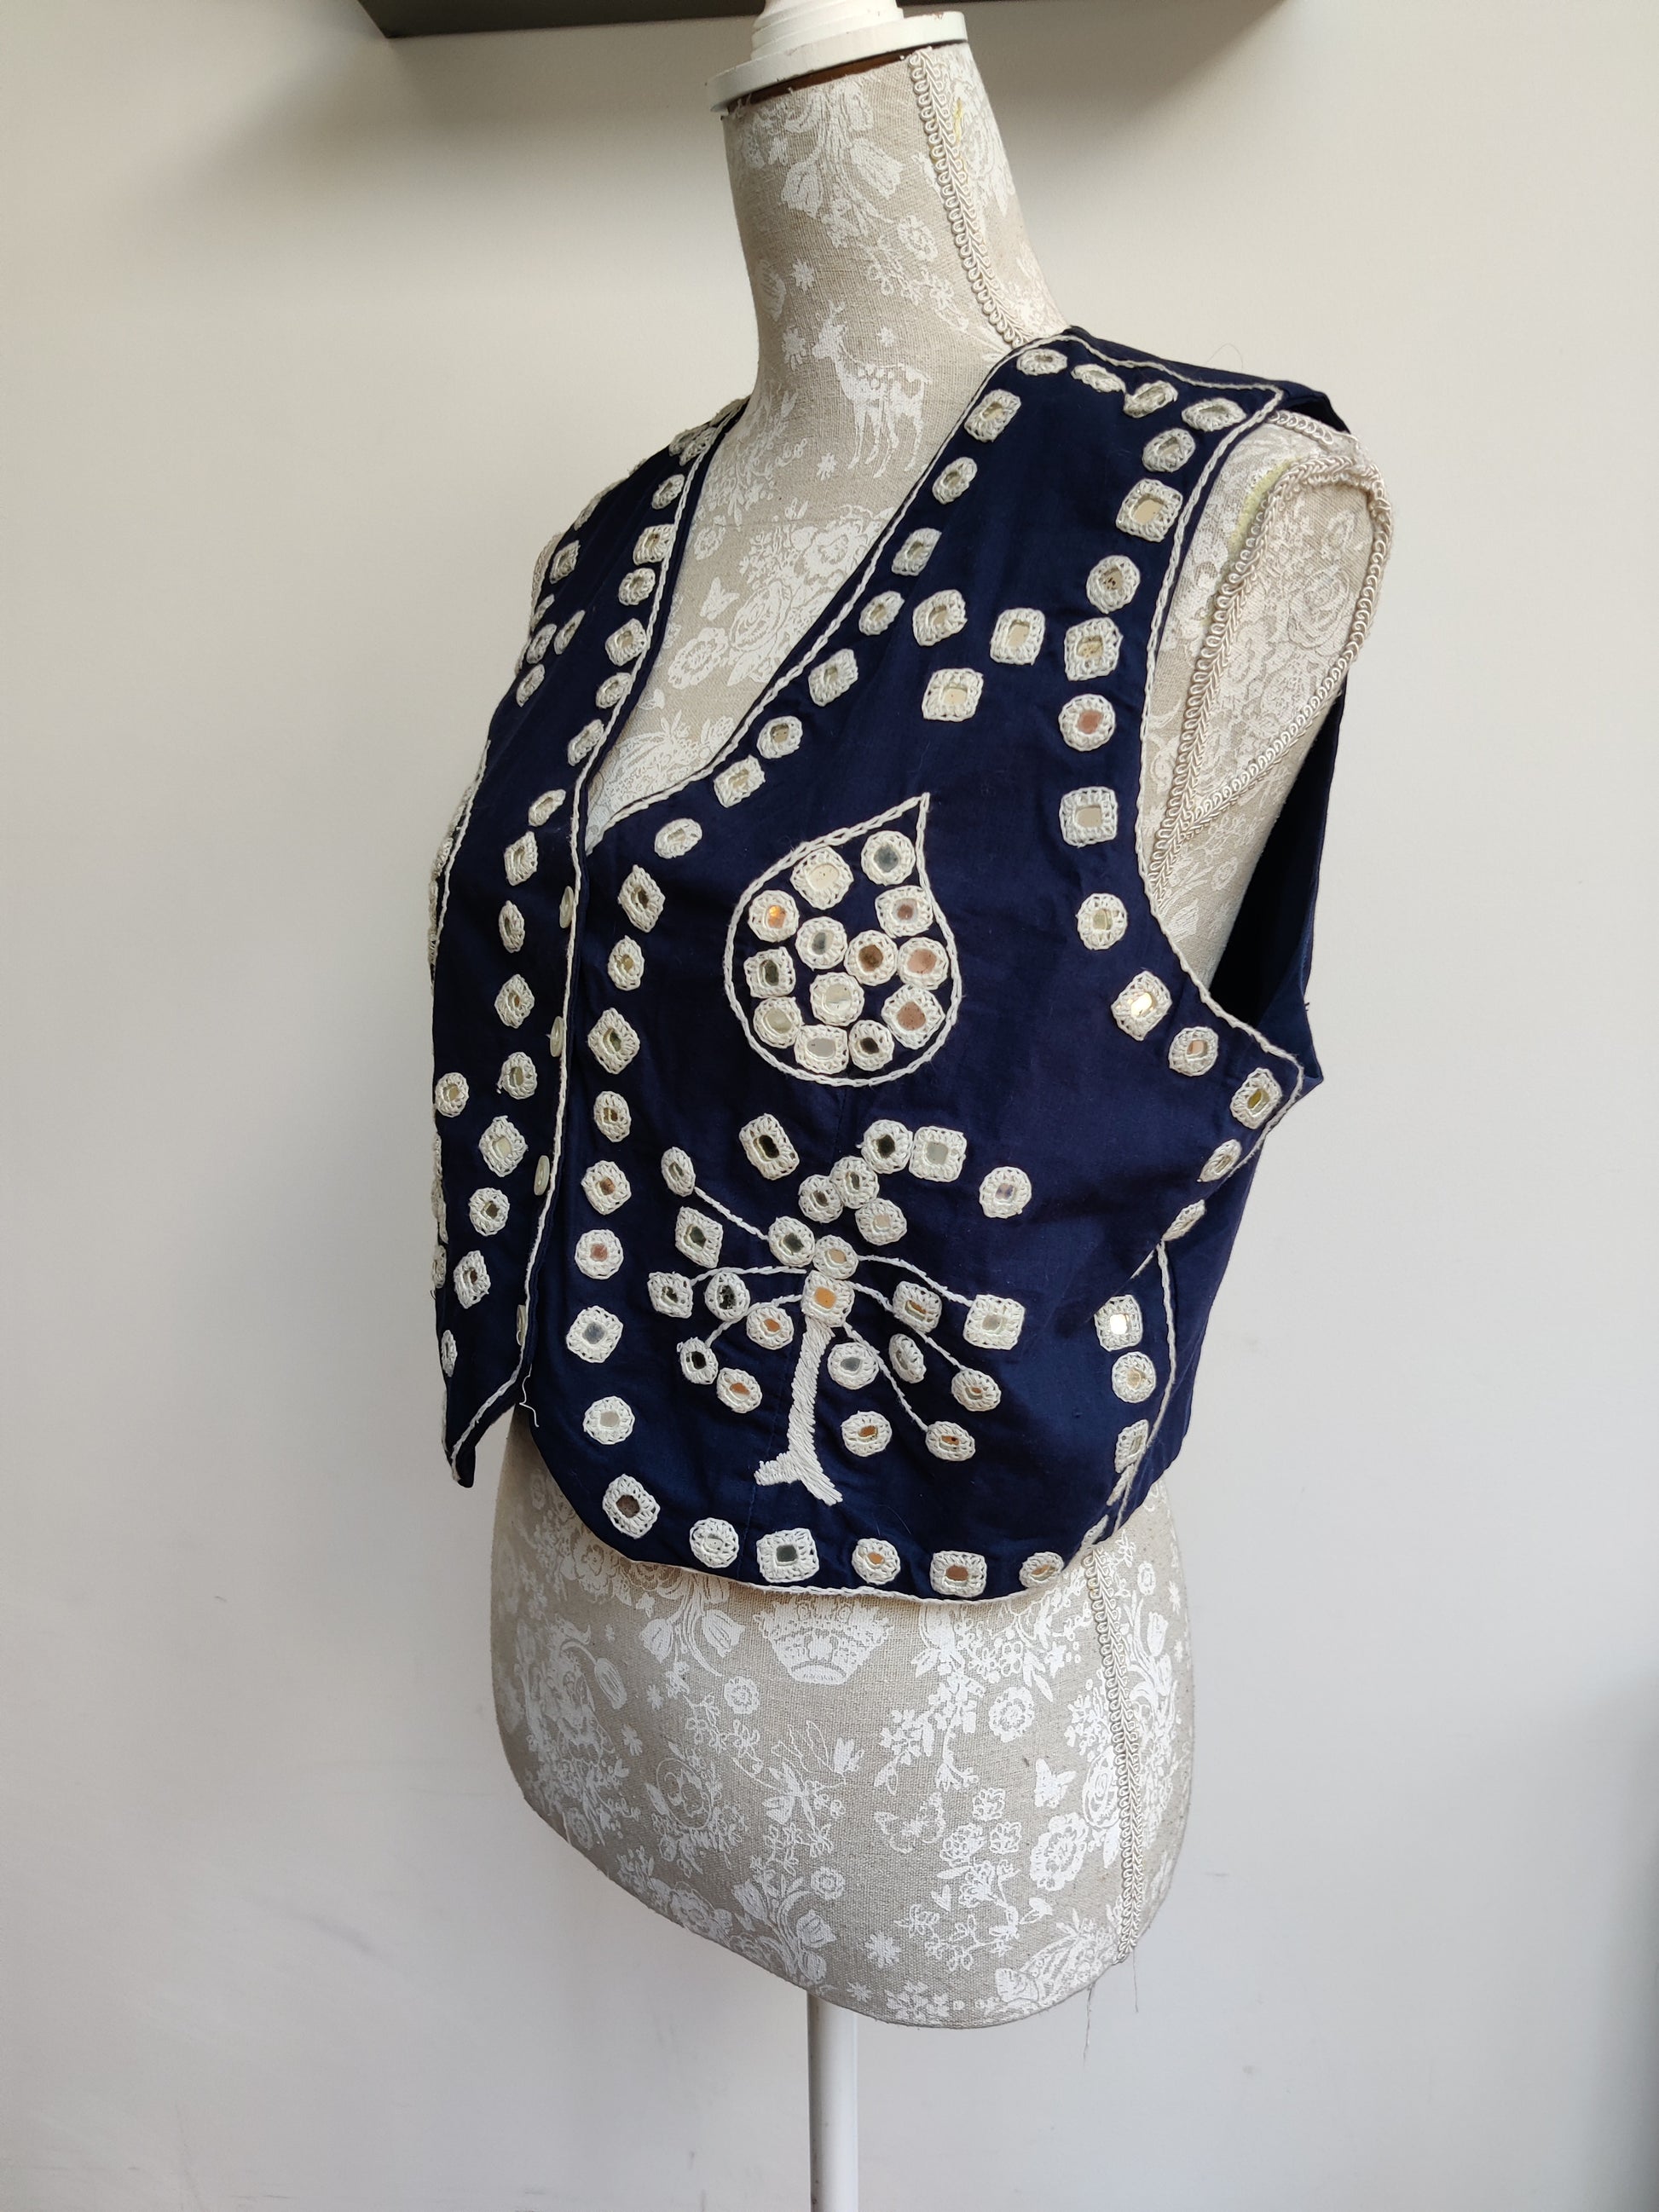 Pearly queen waistcoat